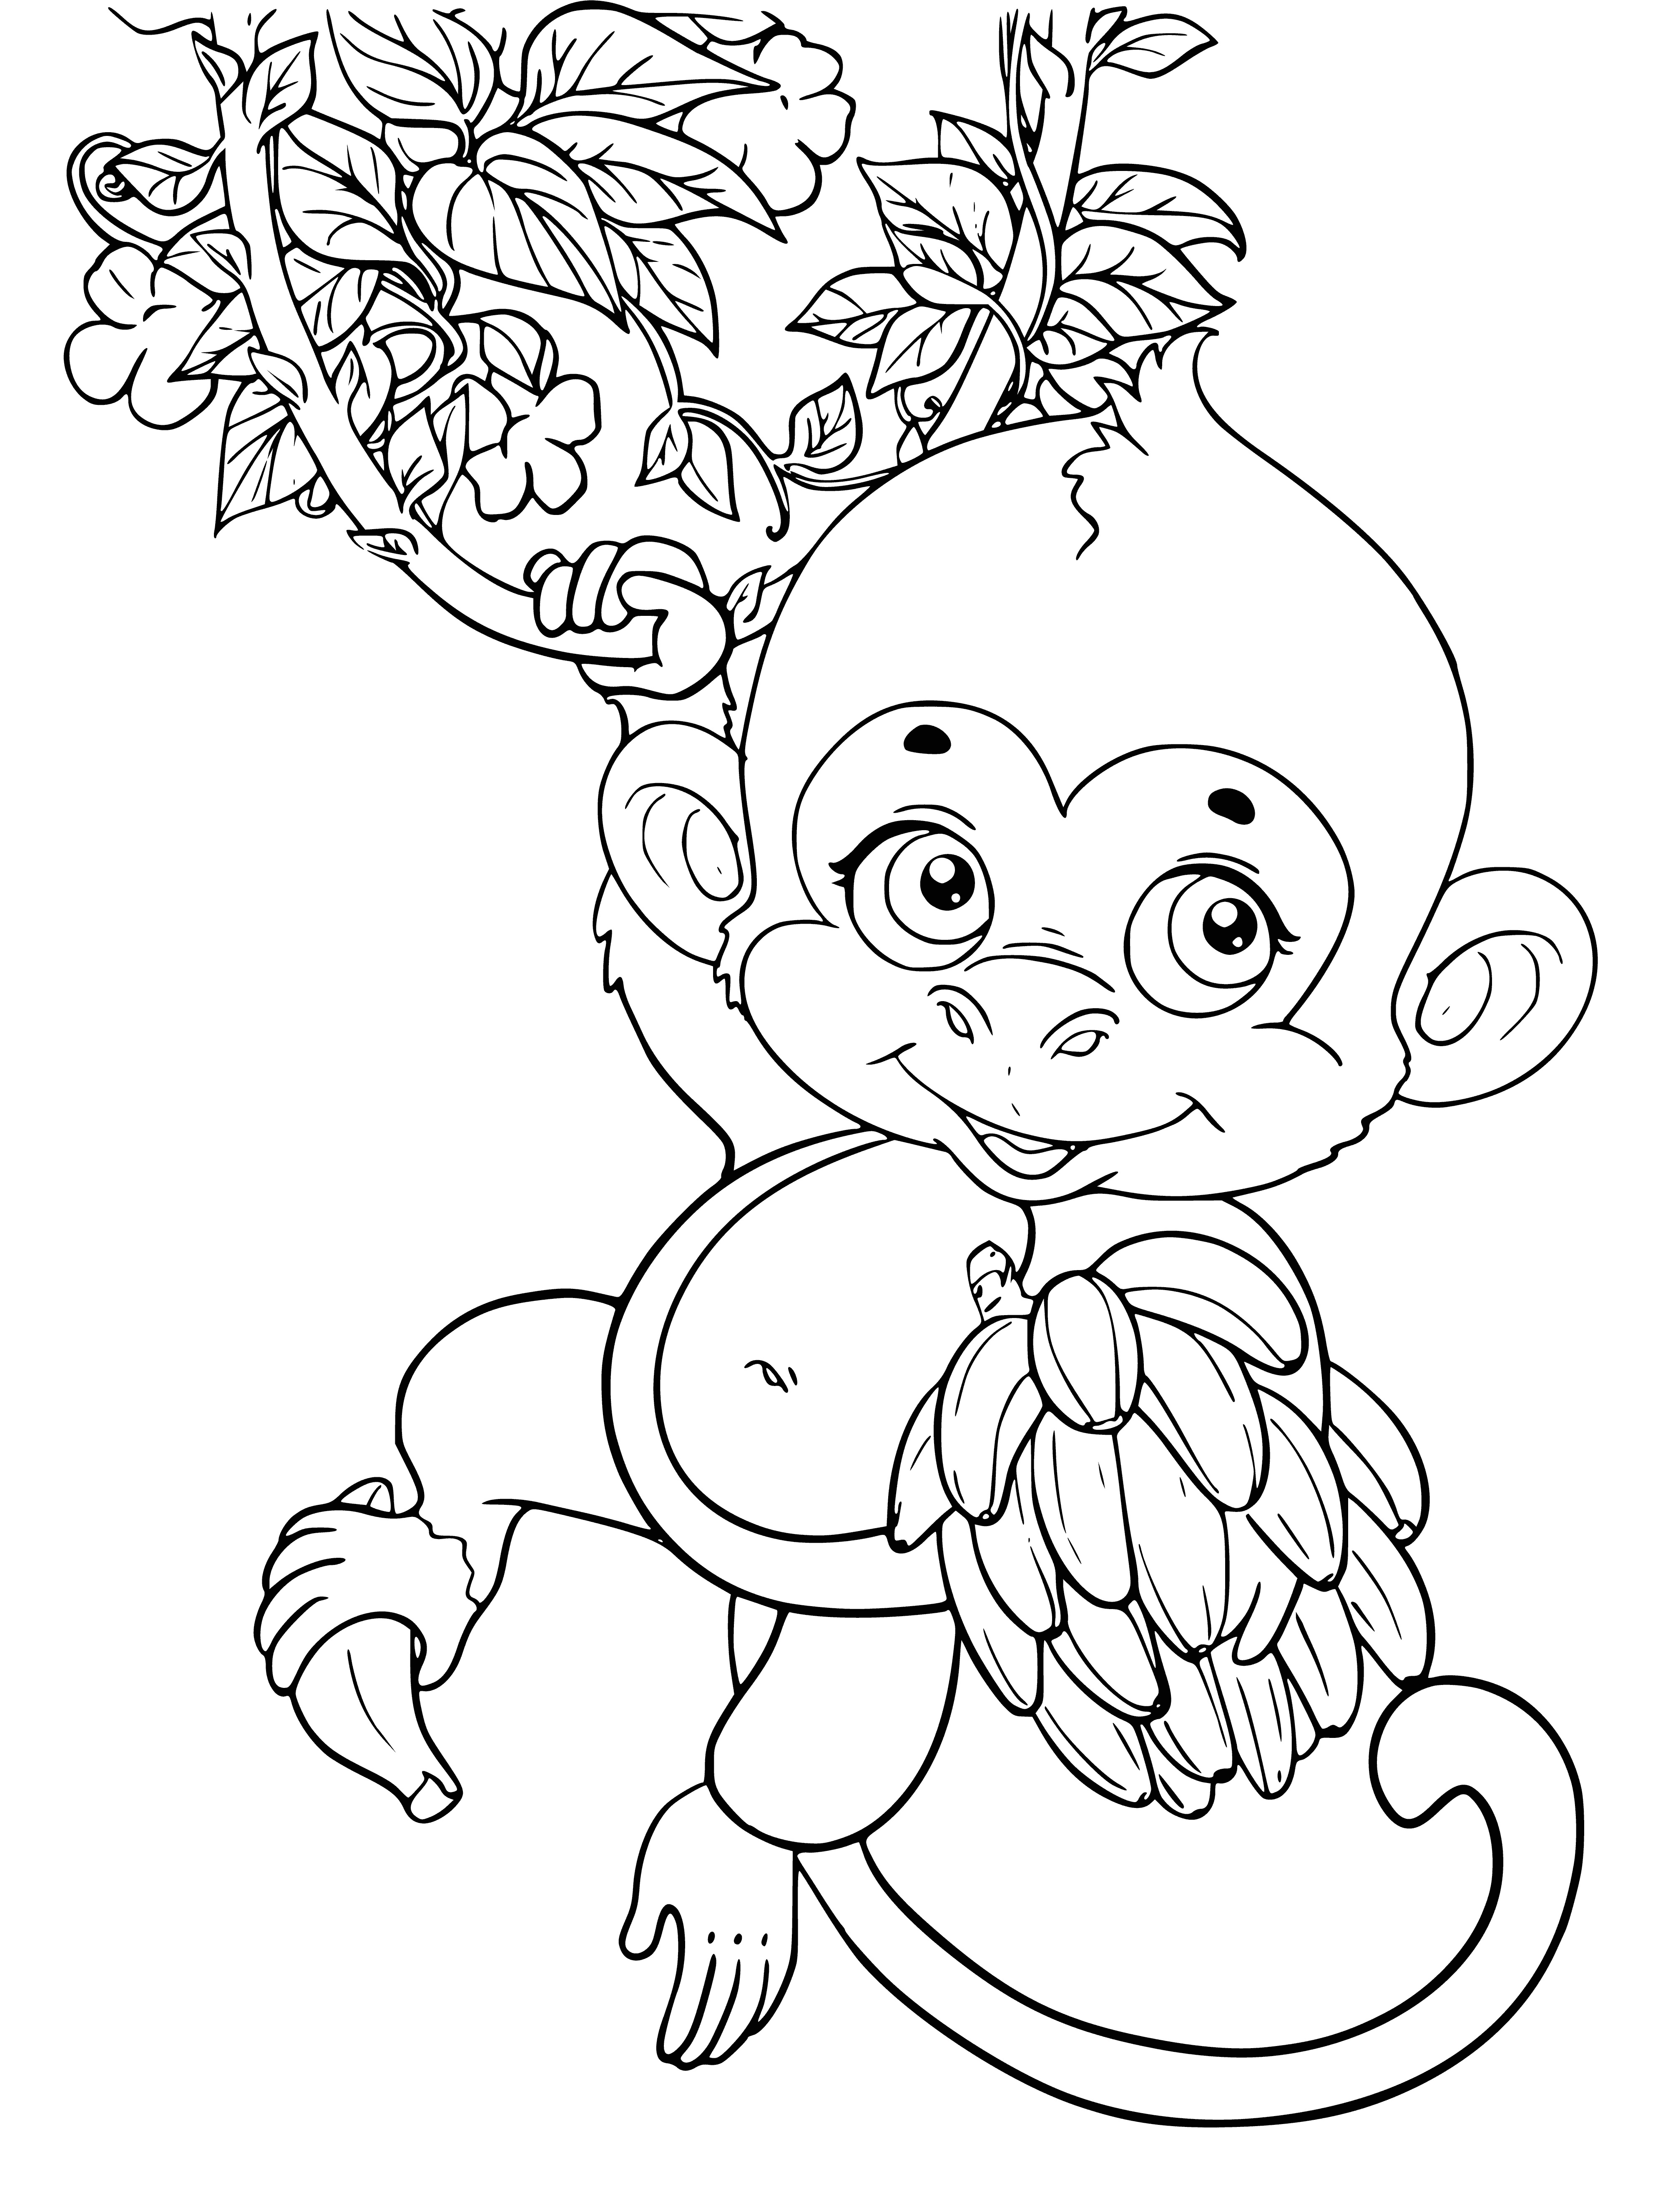 coloring page: Monkeys eating bananas in trees, enjoying themselves in a coloring page. #coloringtime #monkeymania